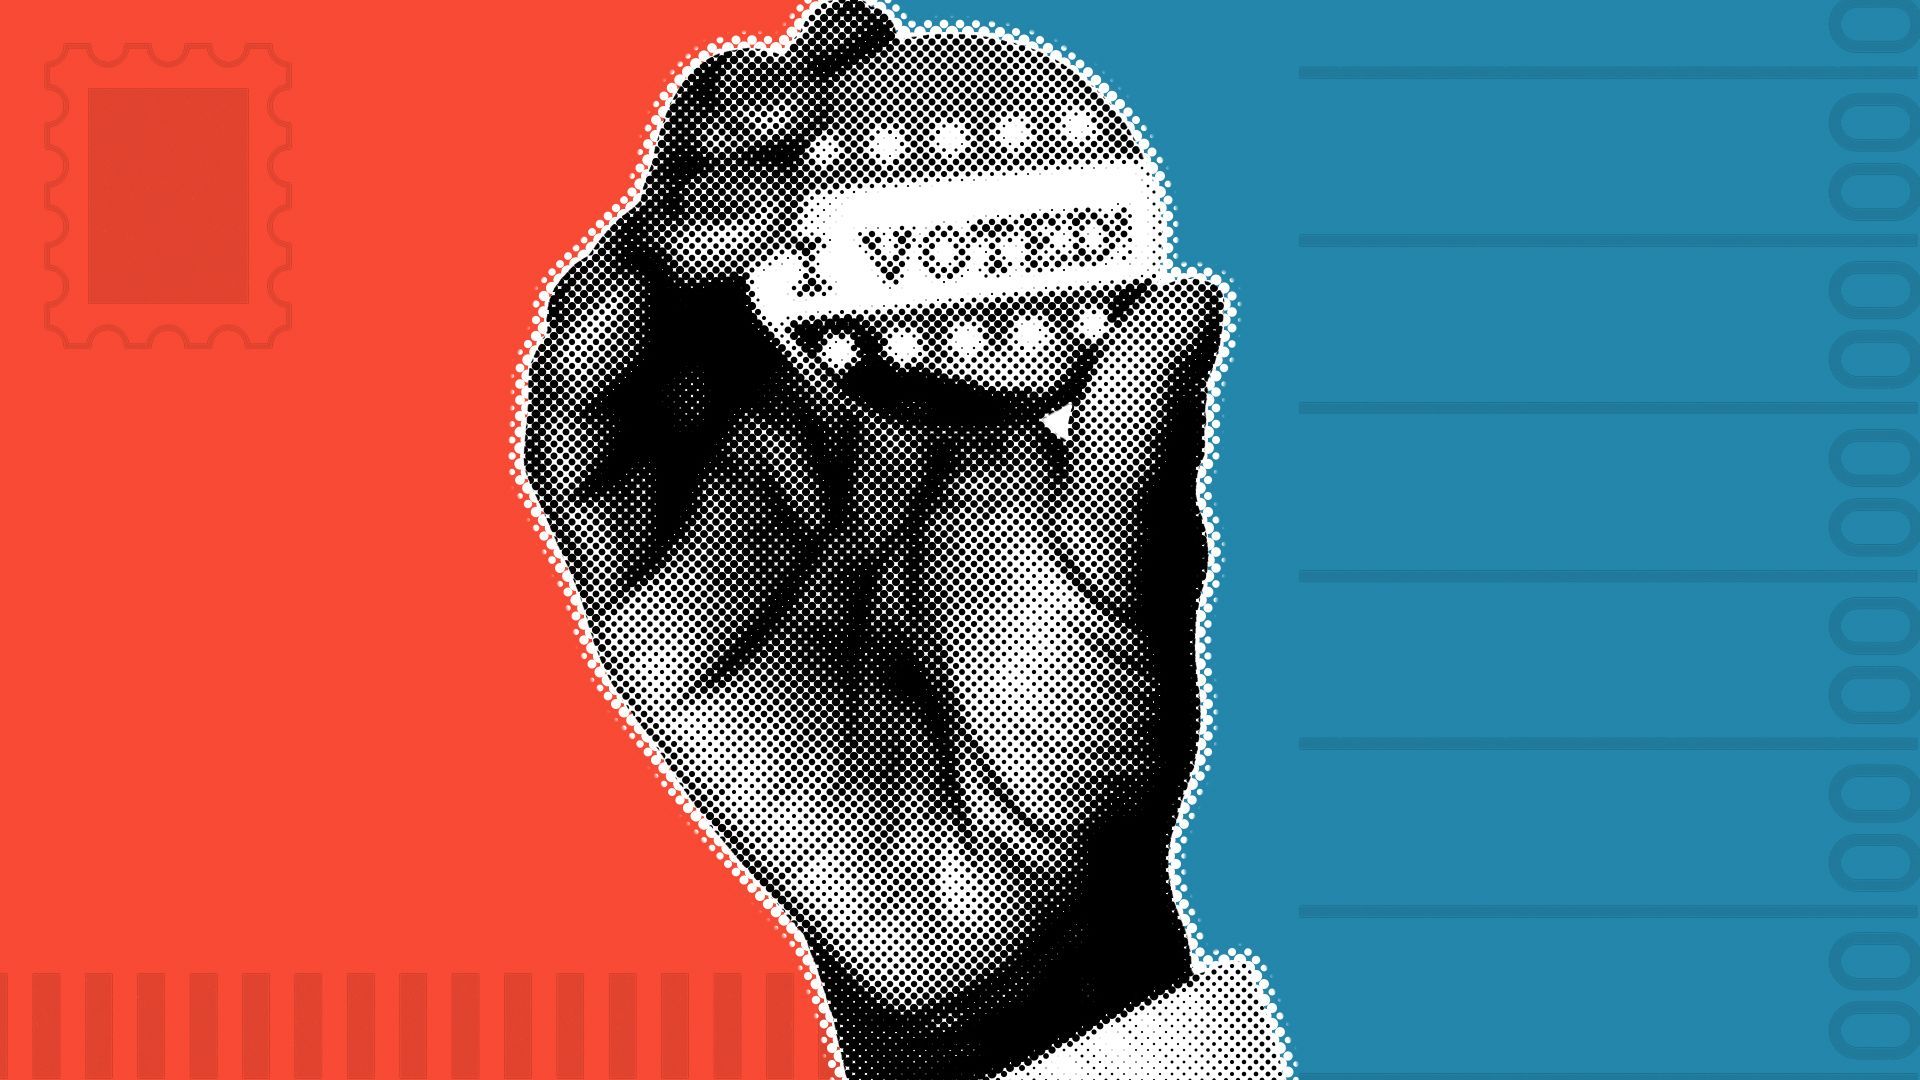 Illustration of an African American man's hand holding an "I Voted!" button  surrounded by ballot elements.